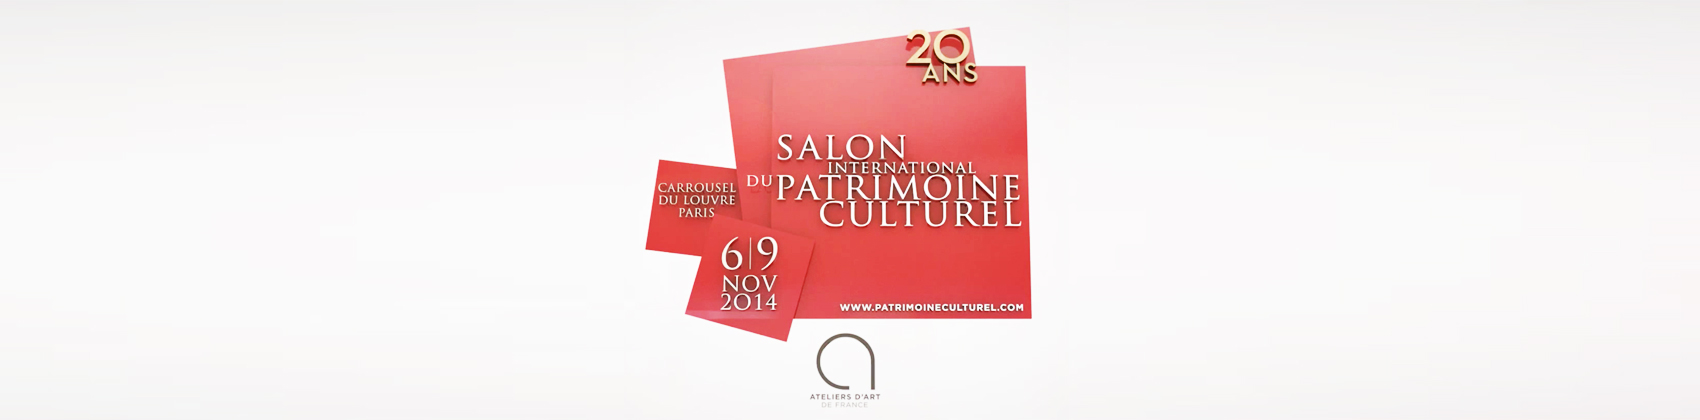 International Heritage Show, promotion of the French craftsmen excellence | Human Heritage